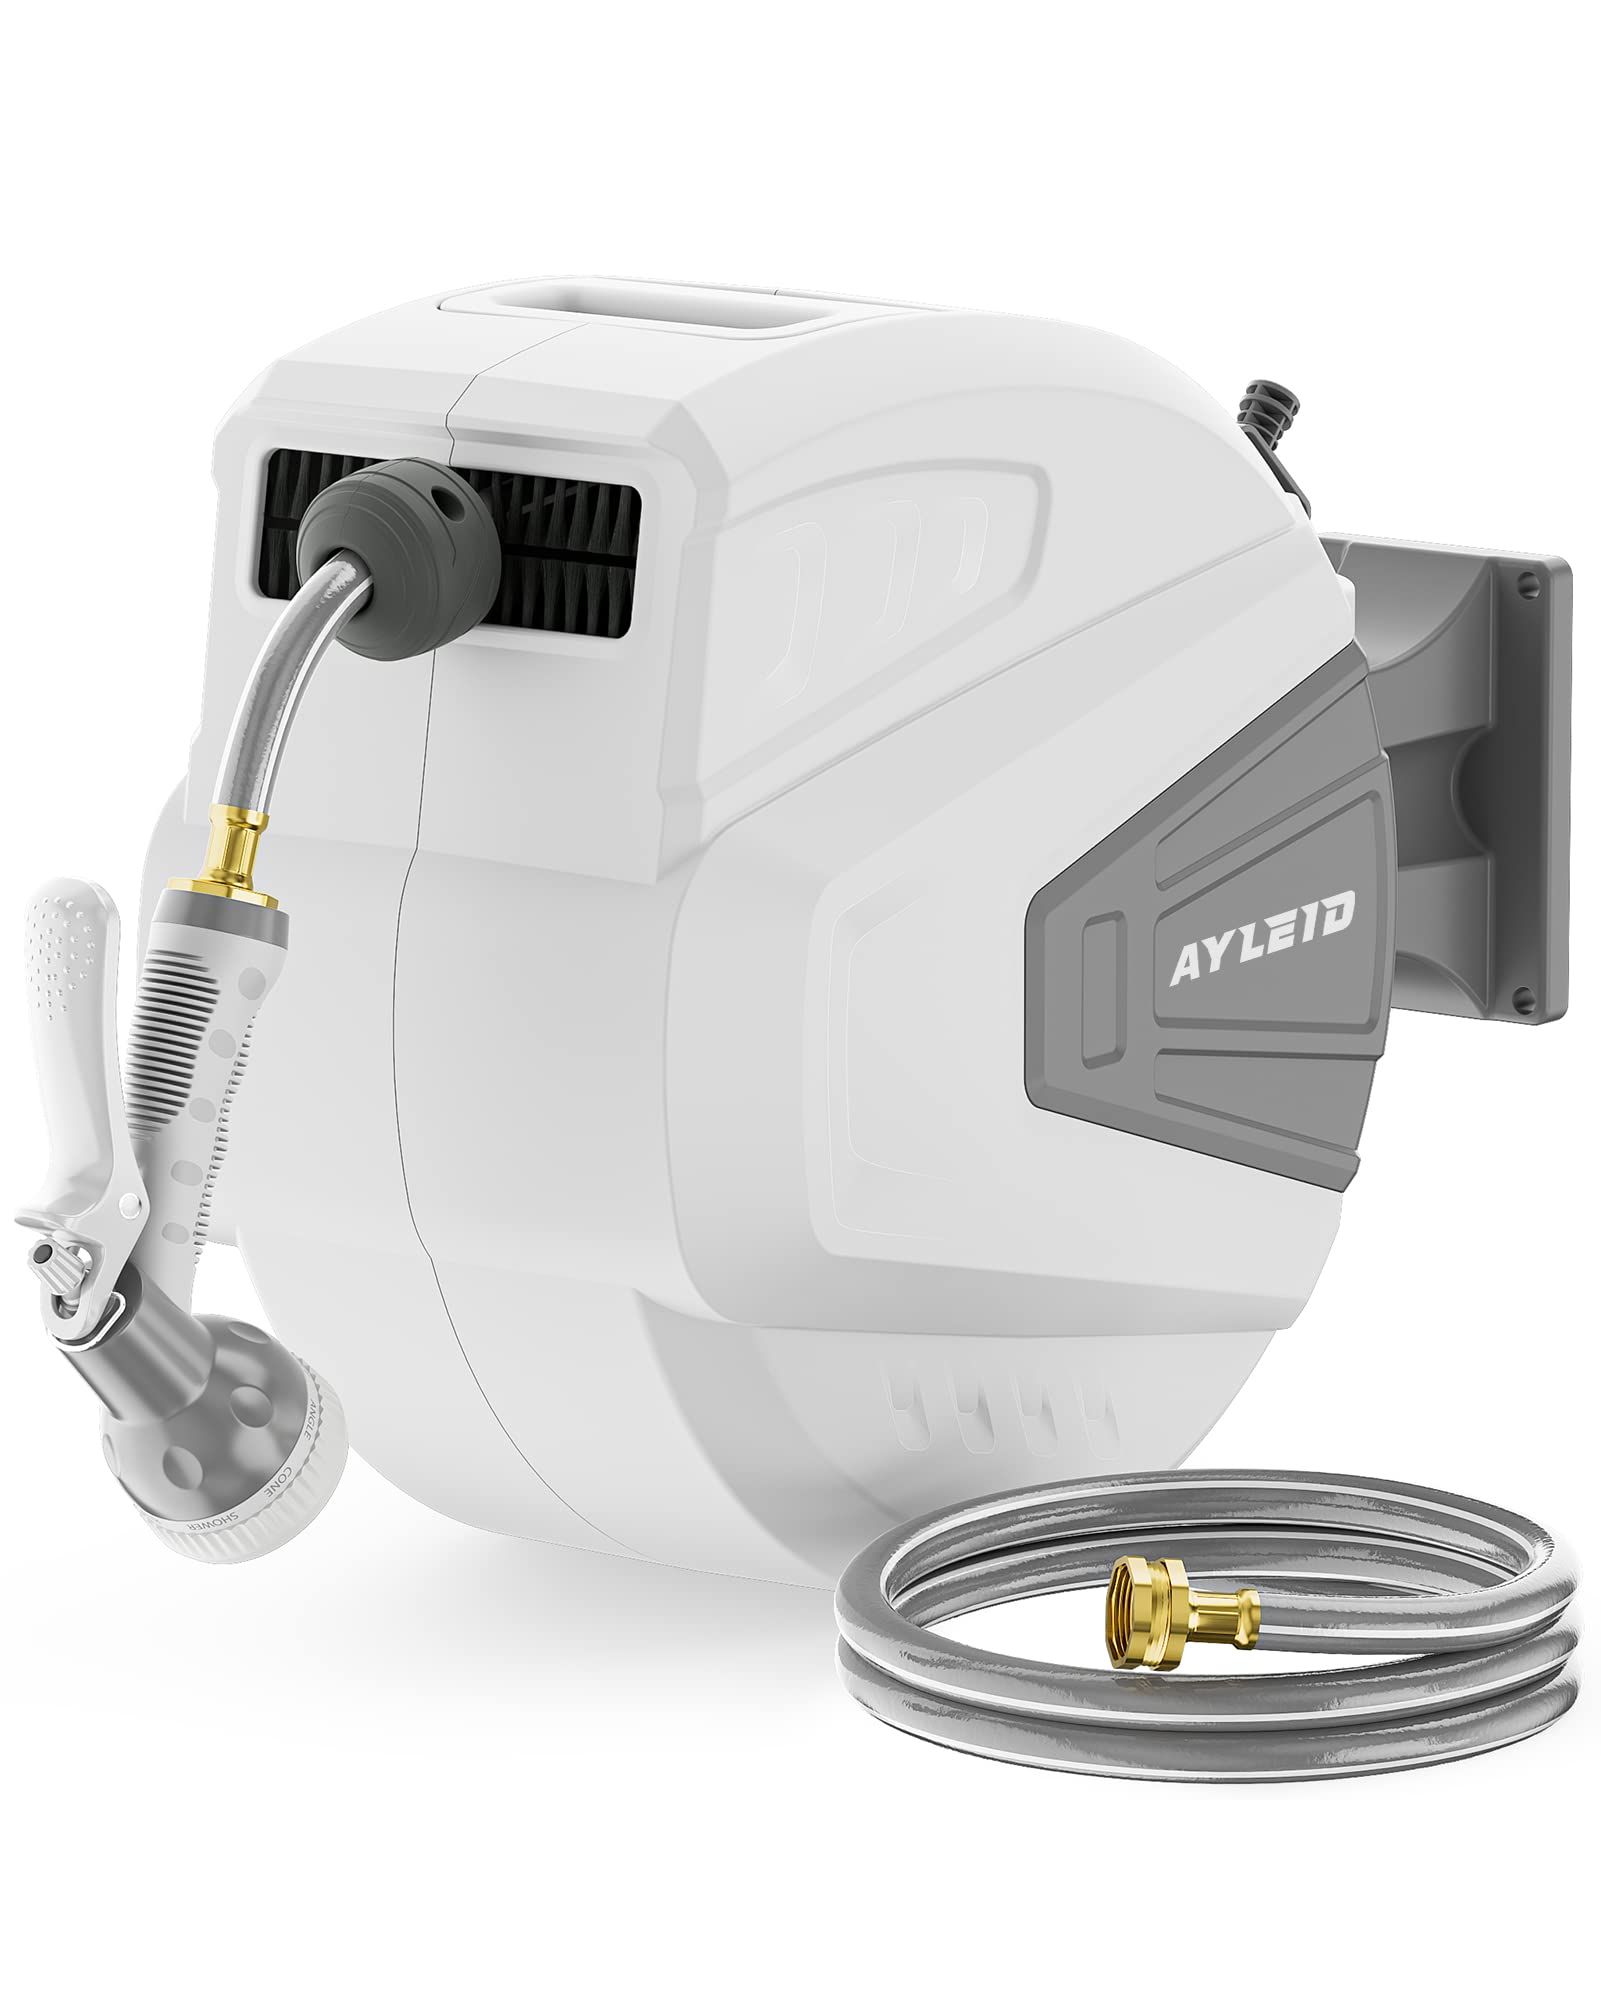 Ayleid Retractable Garden Hose Reel,1/2 in x 100 ft Wall Mounted Hose Reel, with 9- Function Sprayer | Amazon (US)